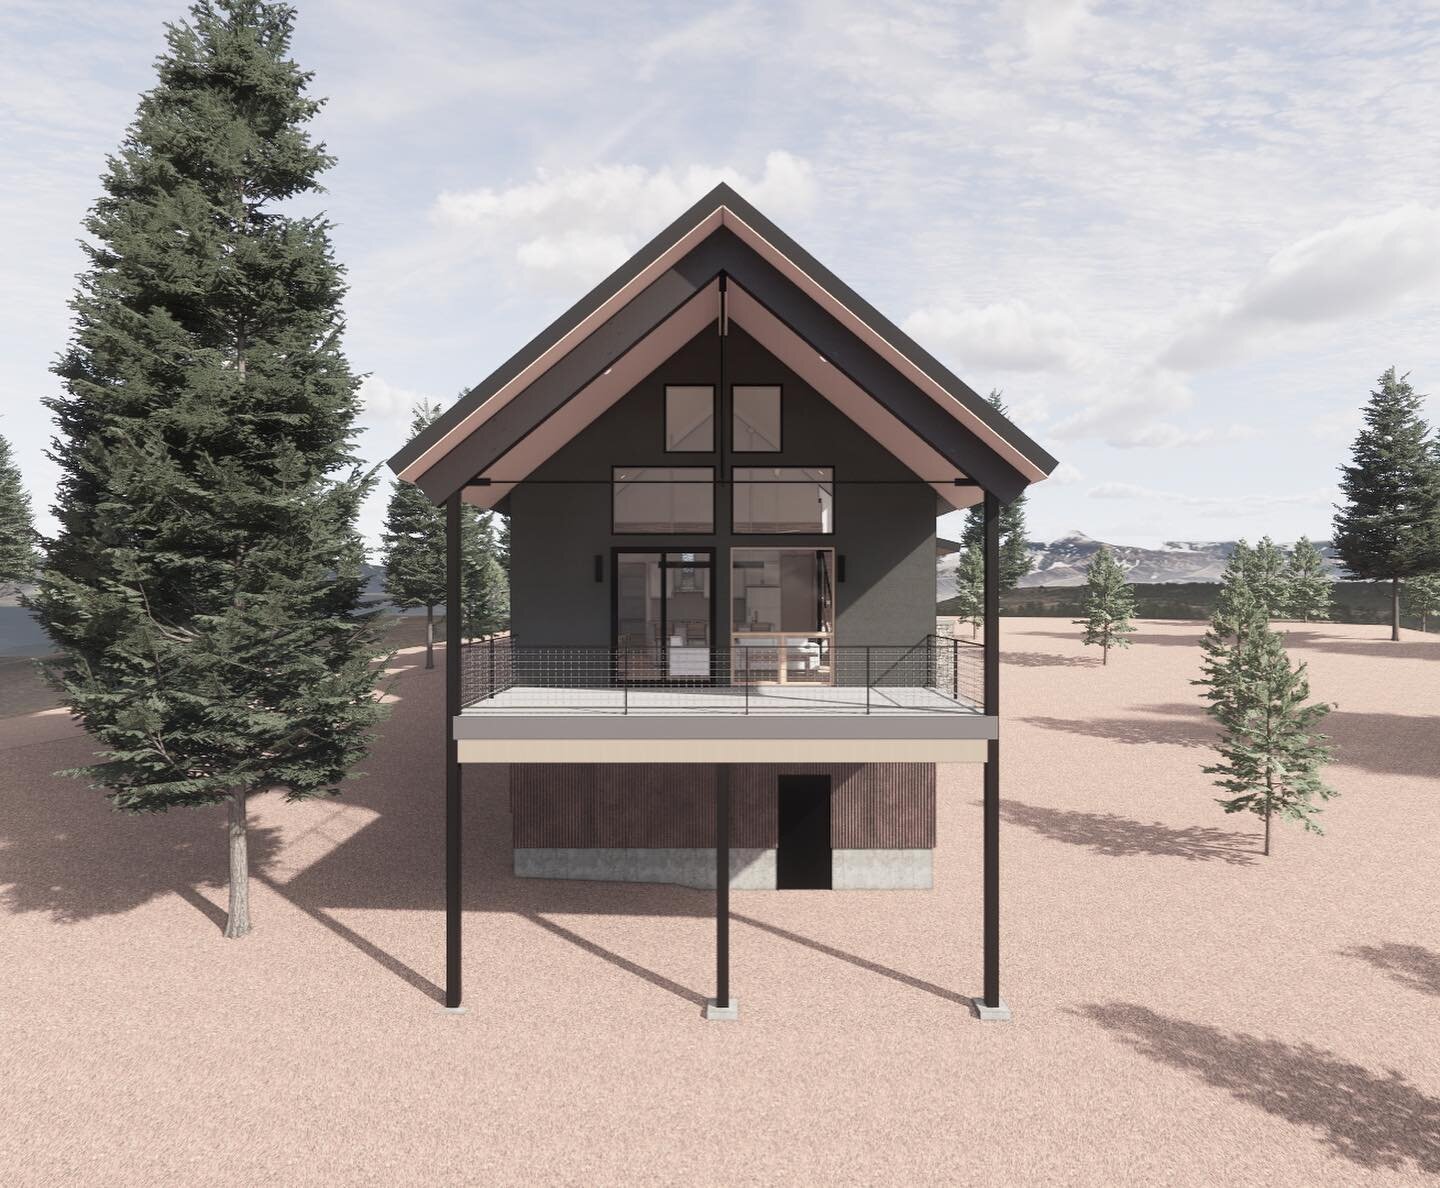 Lake Purgatory

A modern mountain home nestled on a rocky site with views of Castle Rock. 

Construction slated for late summer 2023. 

#thisisMESA

#mesarchitecture #durangocolorado #coloradoarchitecture #durangoarchitects #enscape